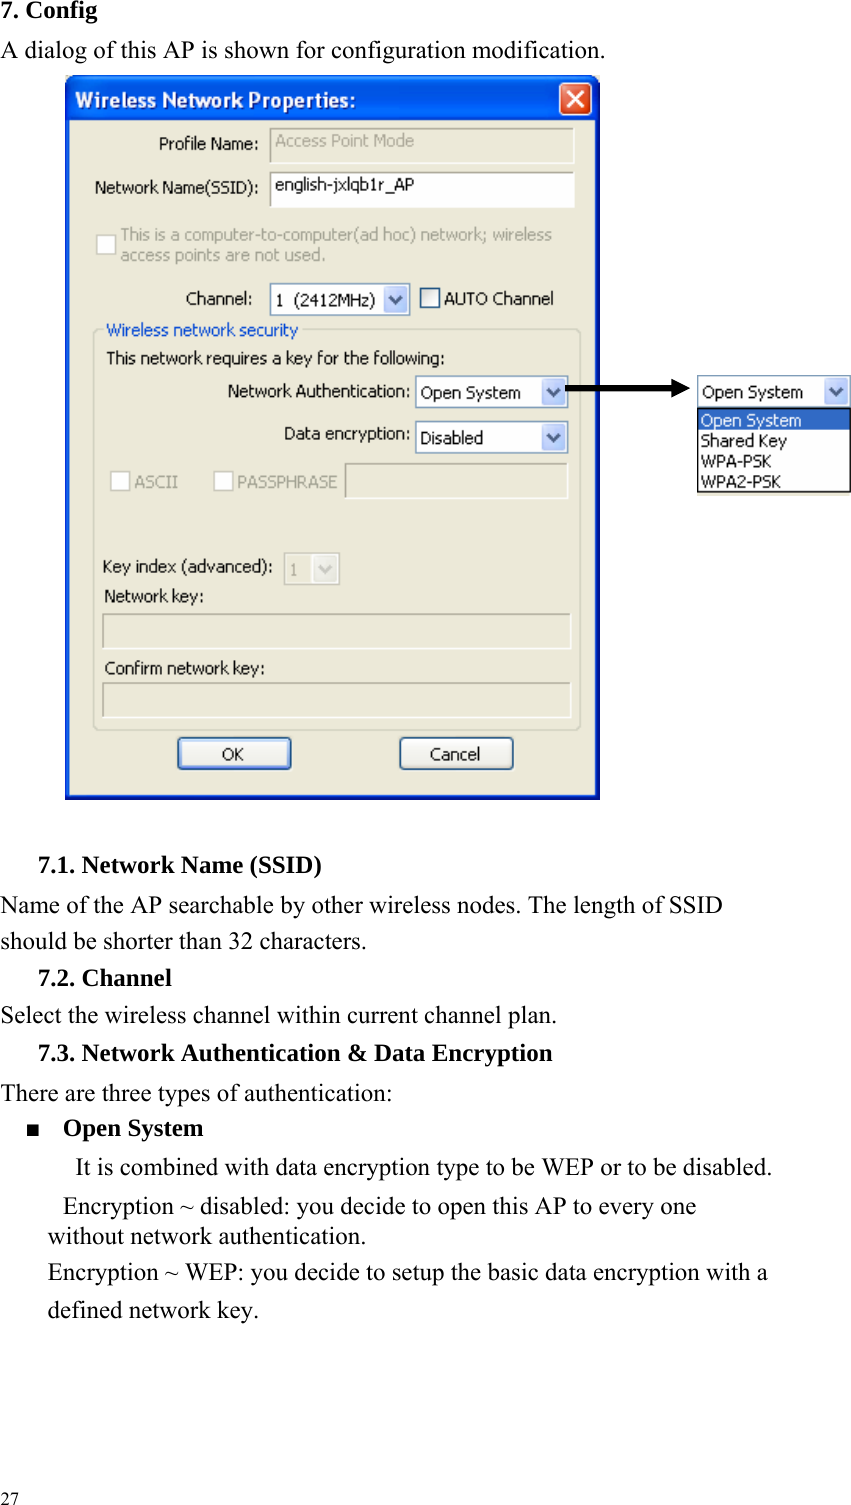 7. Config A dialog of this AP is shown for configuration modification.                                        7.1. Network Name (SSID) Name of the AP searchable by other wireless nodes. The length of SSID should be shorter than 32 characters.     7.2. Channel Select the wireless channel within current channel plan.     7.3. Network Authentication &amp; Data Encryption There are three types of authentication:     ■ Open System     It is combined with data encryption type to be WEP or to be disabled.     Encryption ~ disabled: you decide to open this AP to every one without network authentication.     Encryption ~ WEP: you decide to setup the basic data encryption with a defined network key.     27  